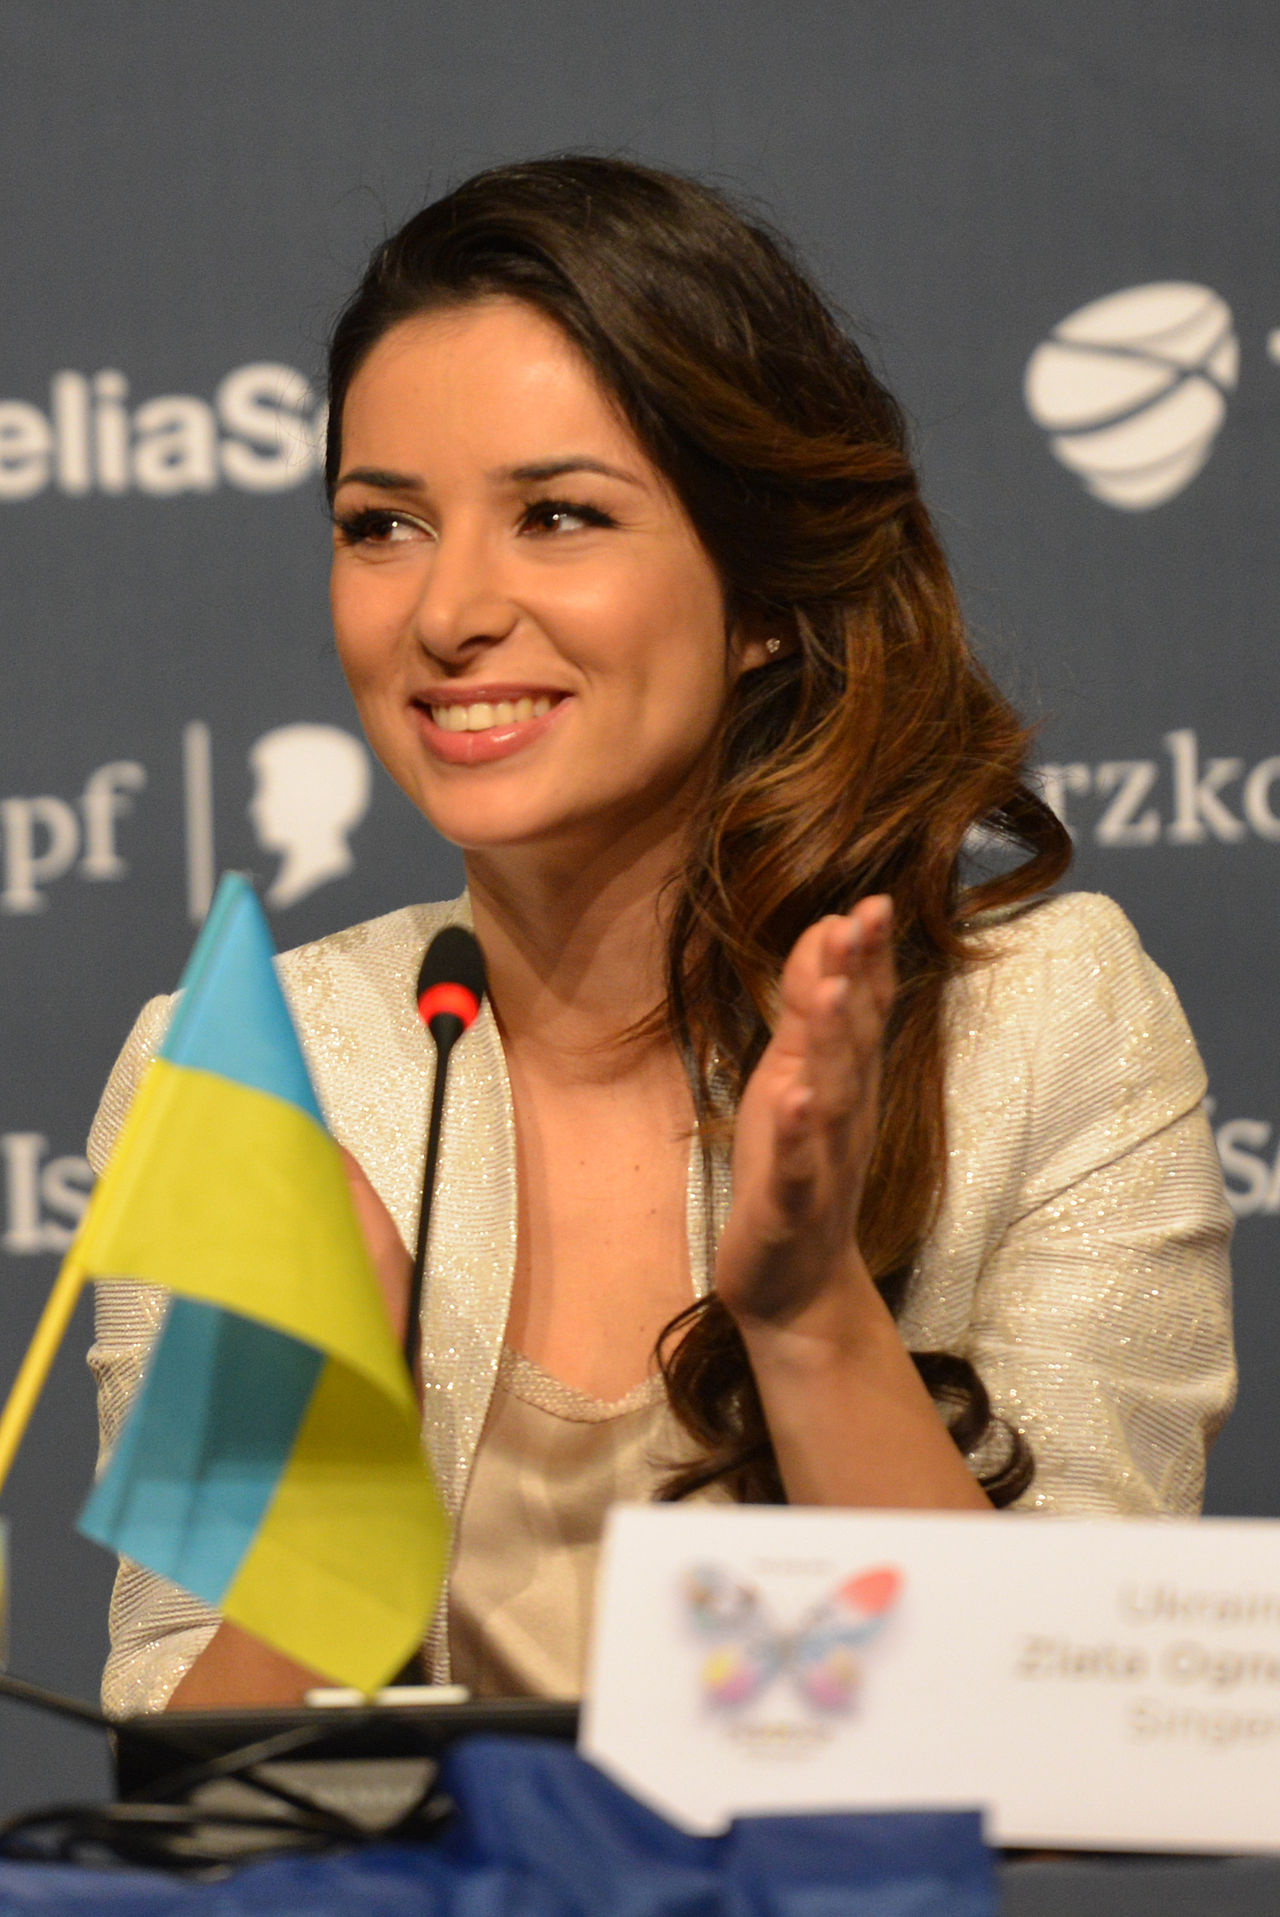 Ukrainian singer Zlata Ognevich talks about what her father does in the army